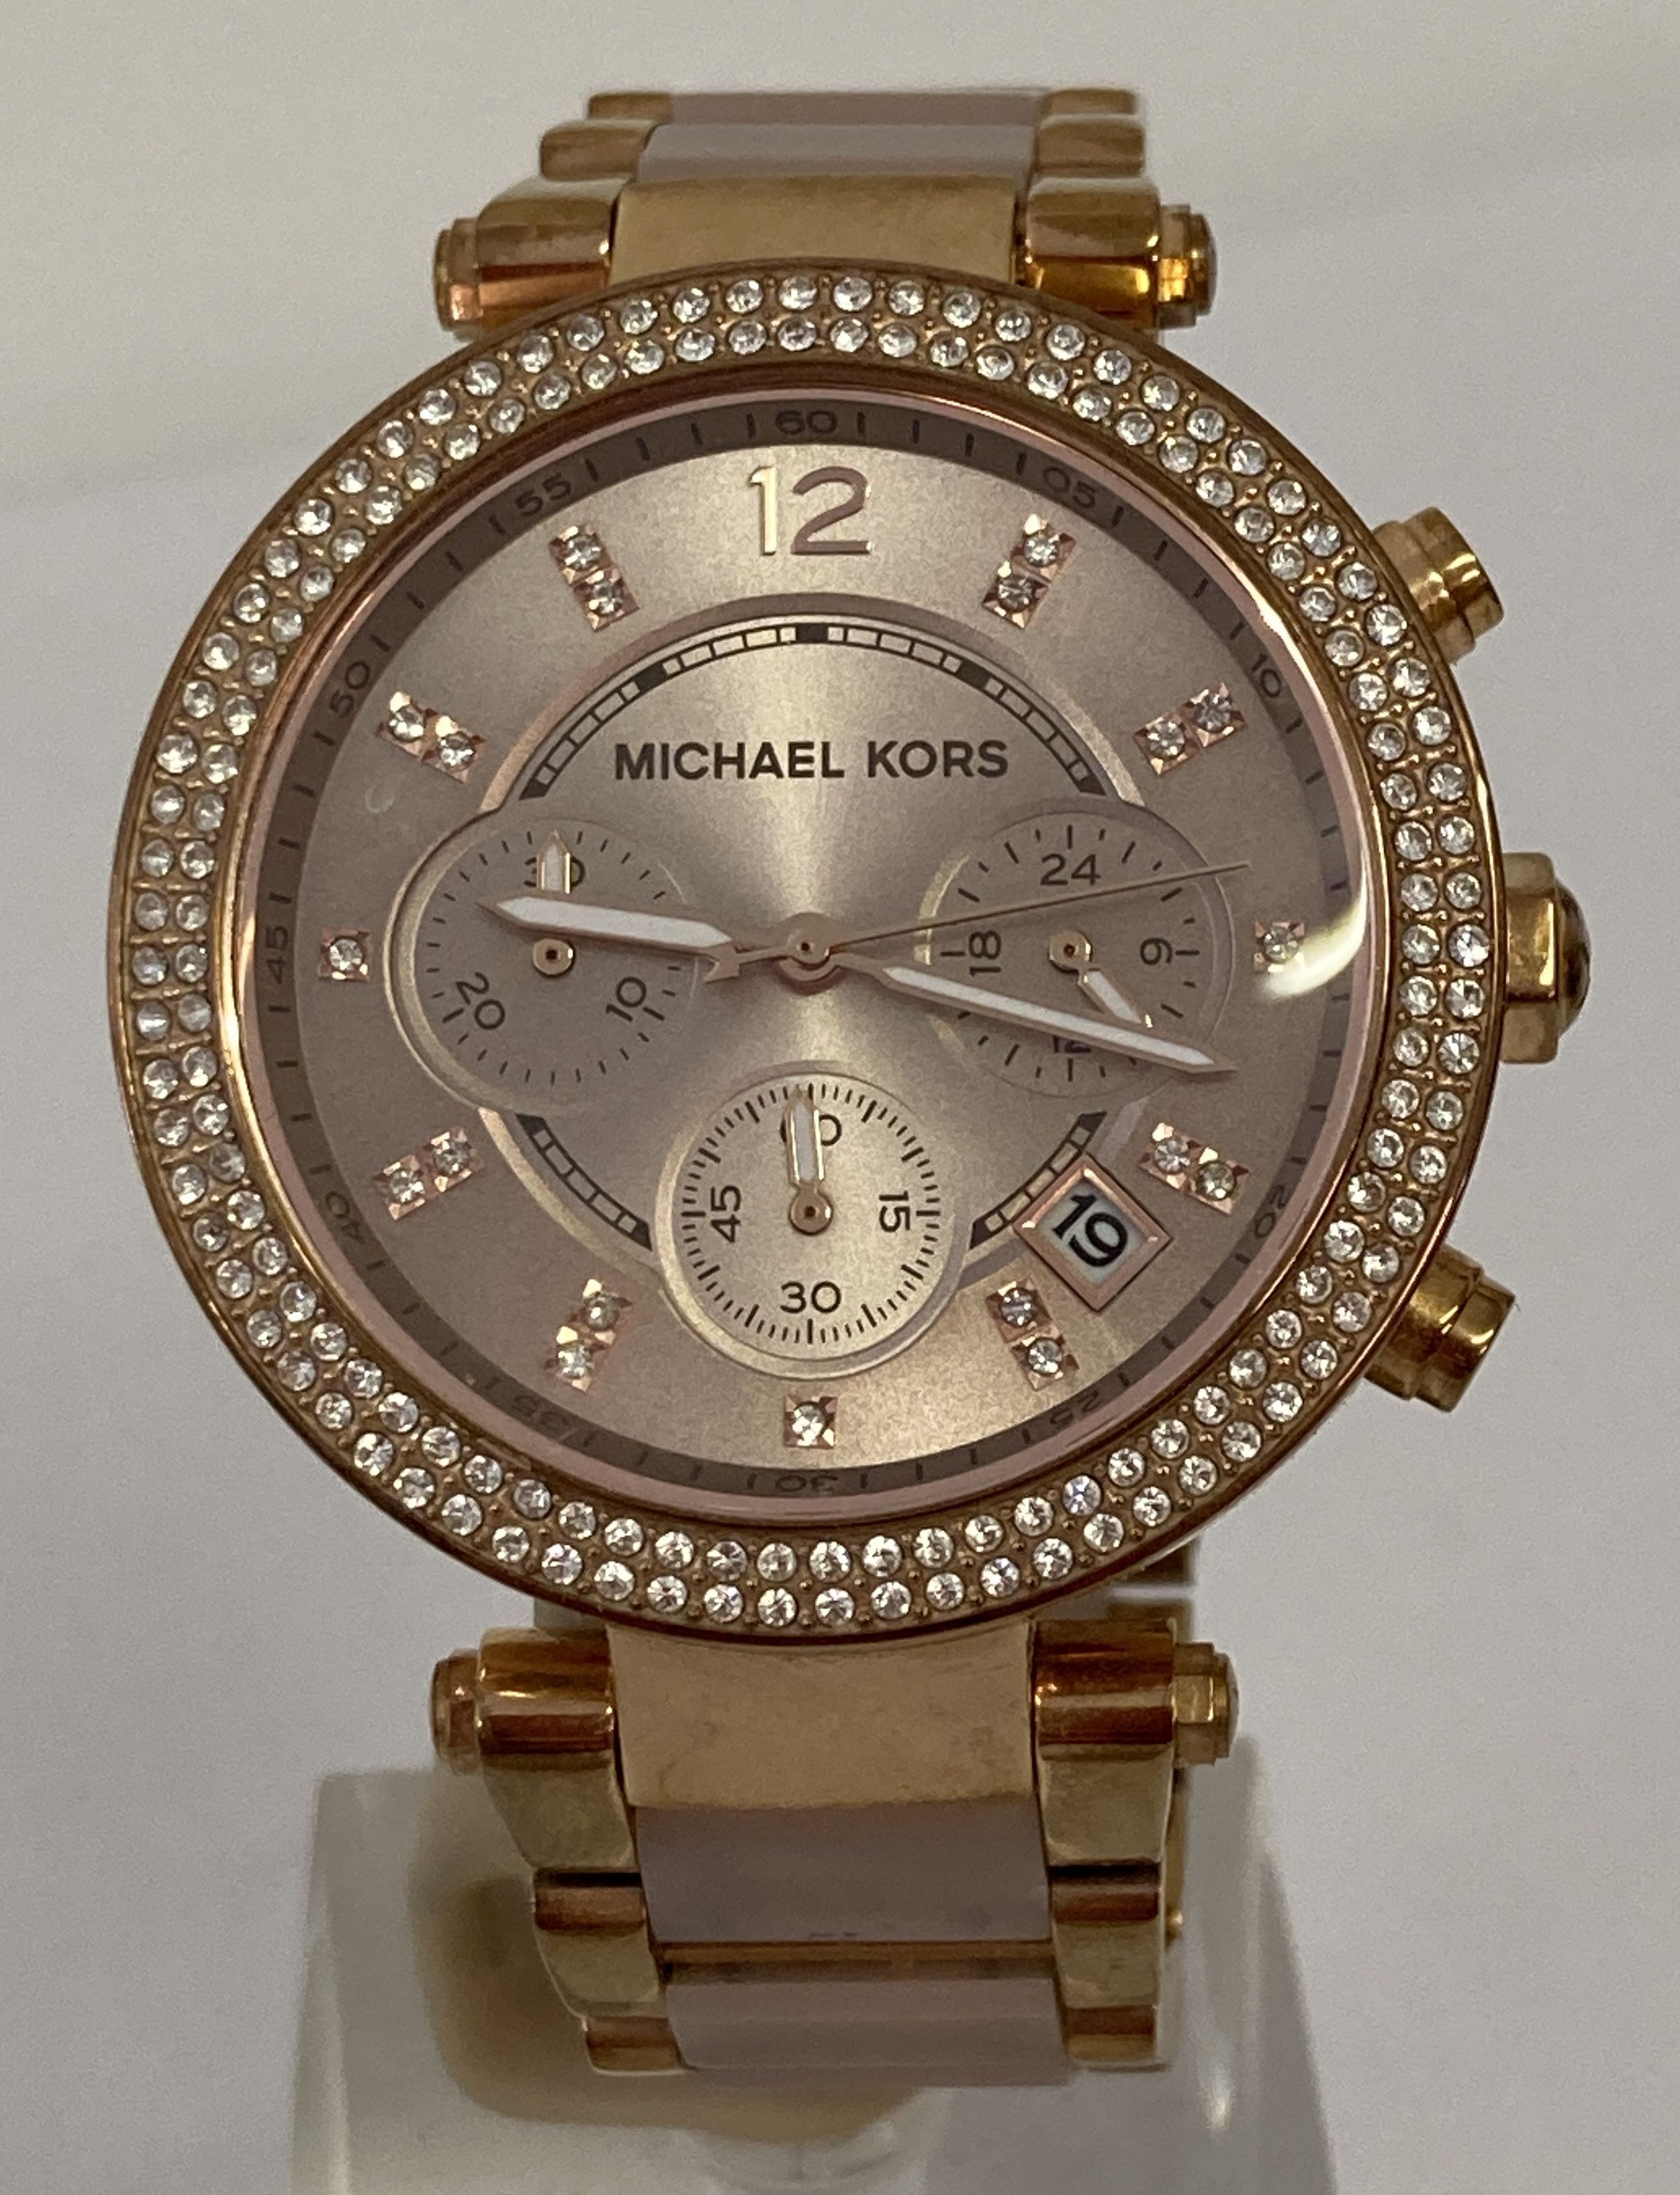 A Michael Kors "Parker" ladies chronograph wrist watch in rose gold finish with blush pink links.